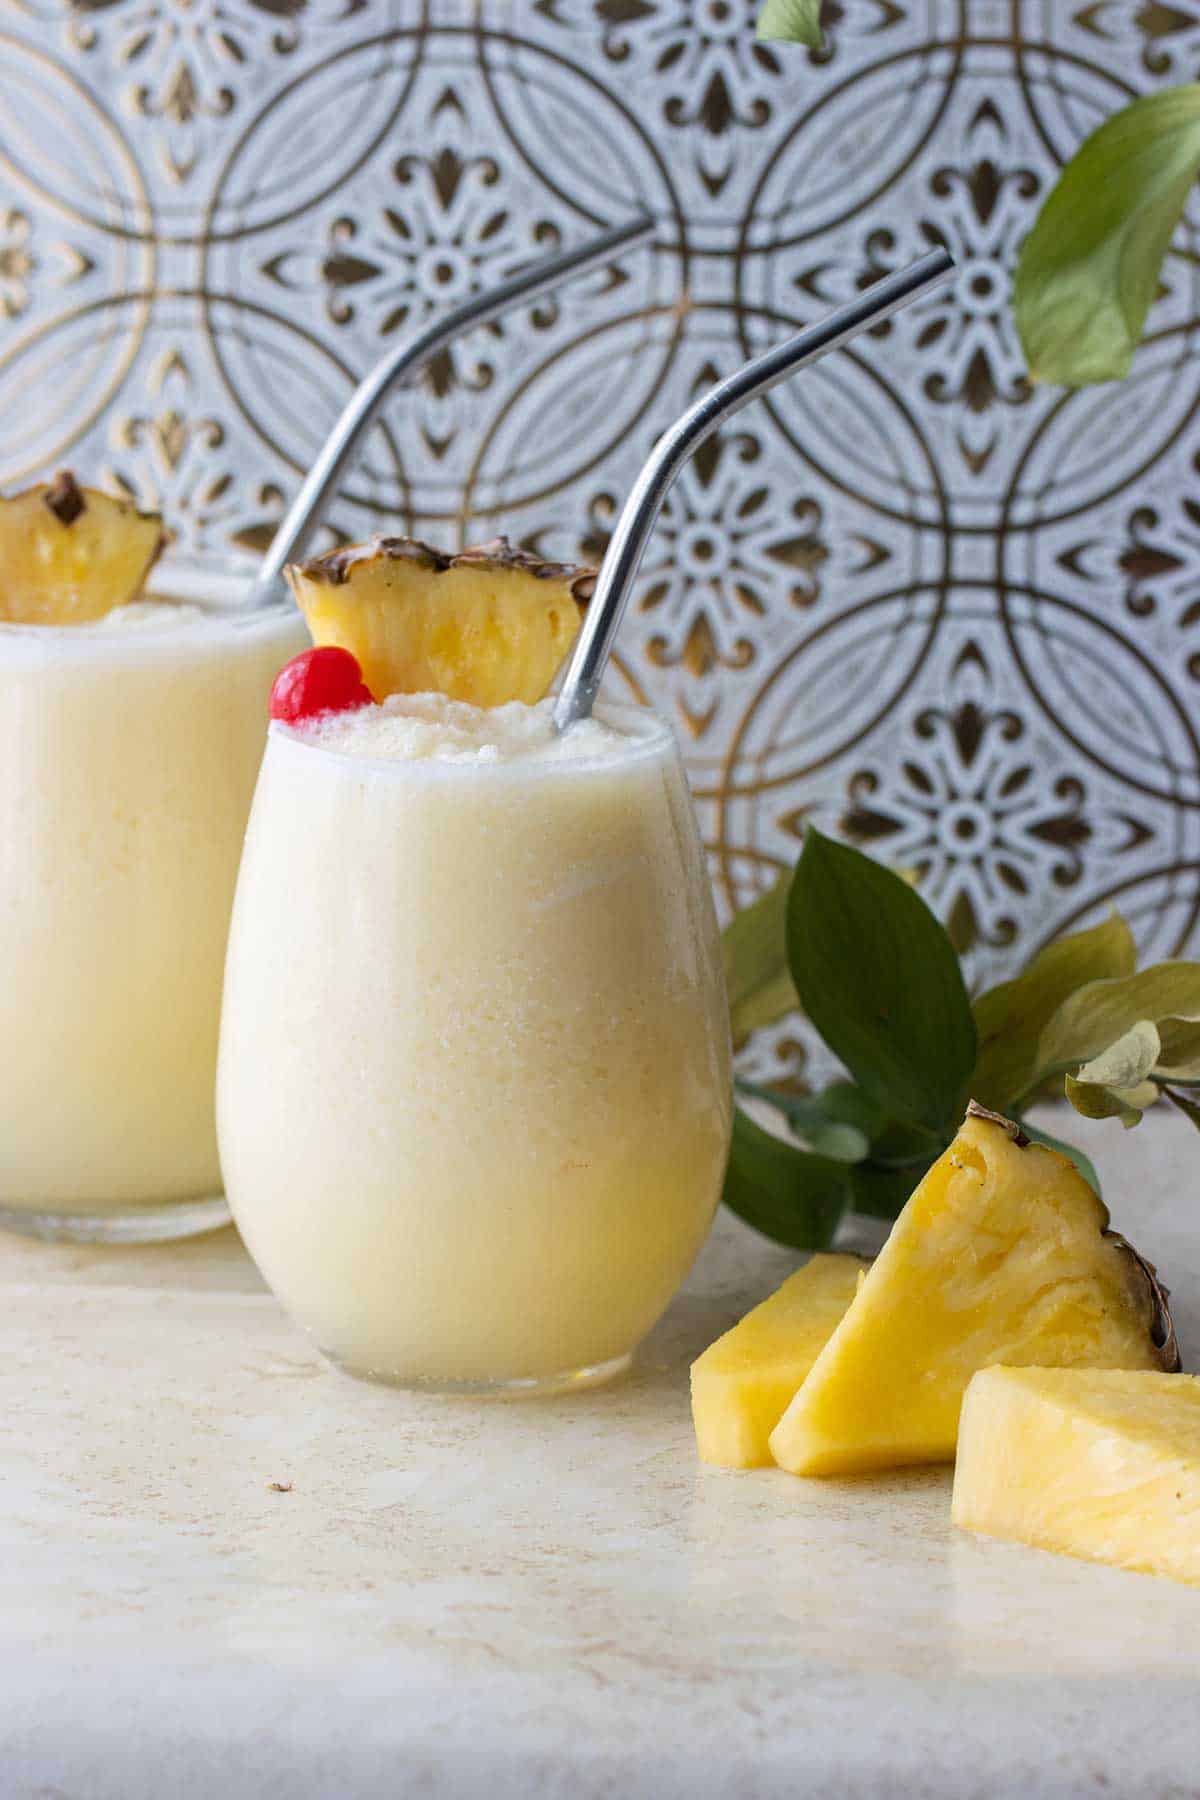 2 cups of pina colada with straws and topped with a cherry and pineapple chunks.